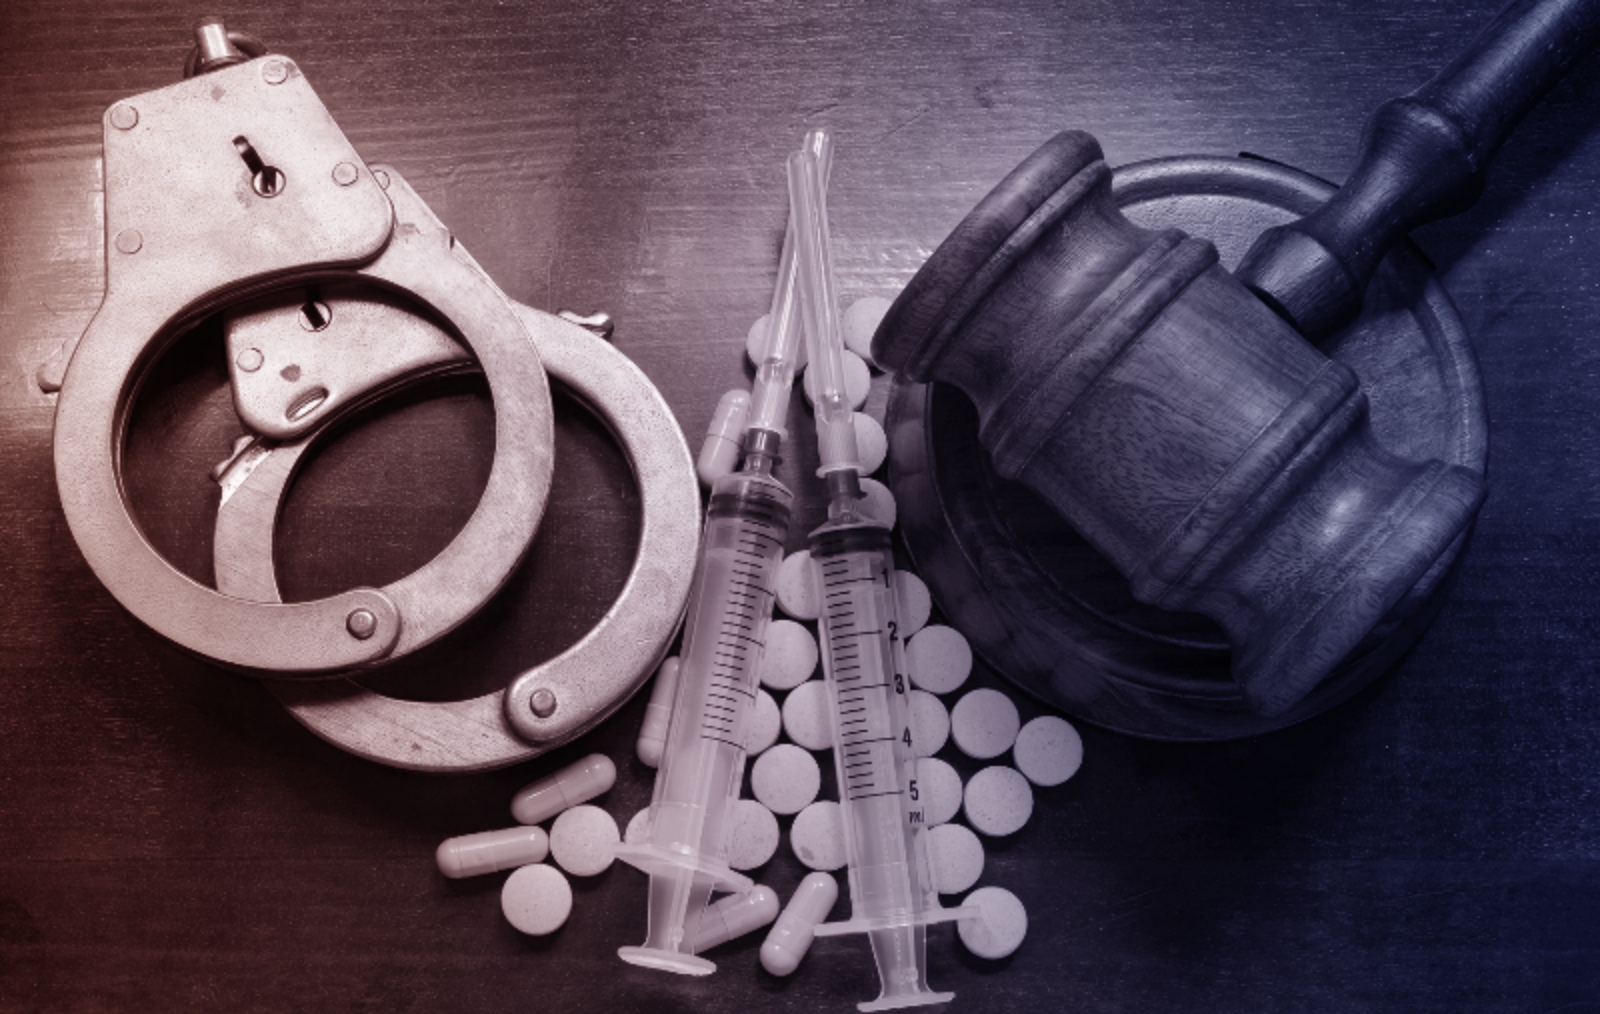 Leading Pharmacists in the US Call for Decriminalization of all Drugs